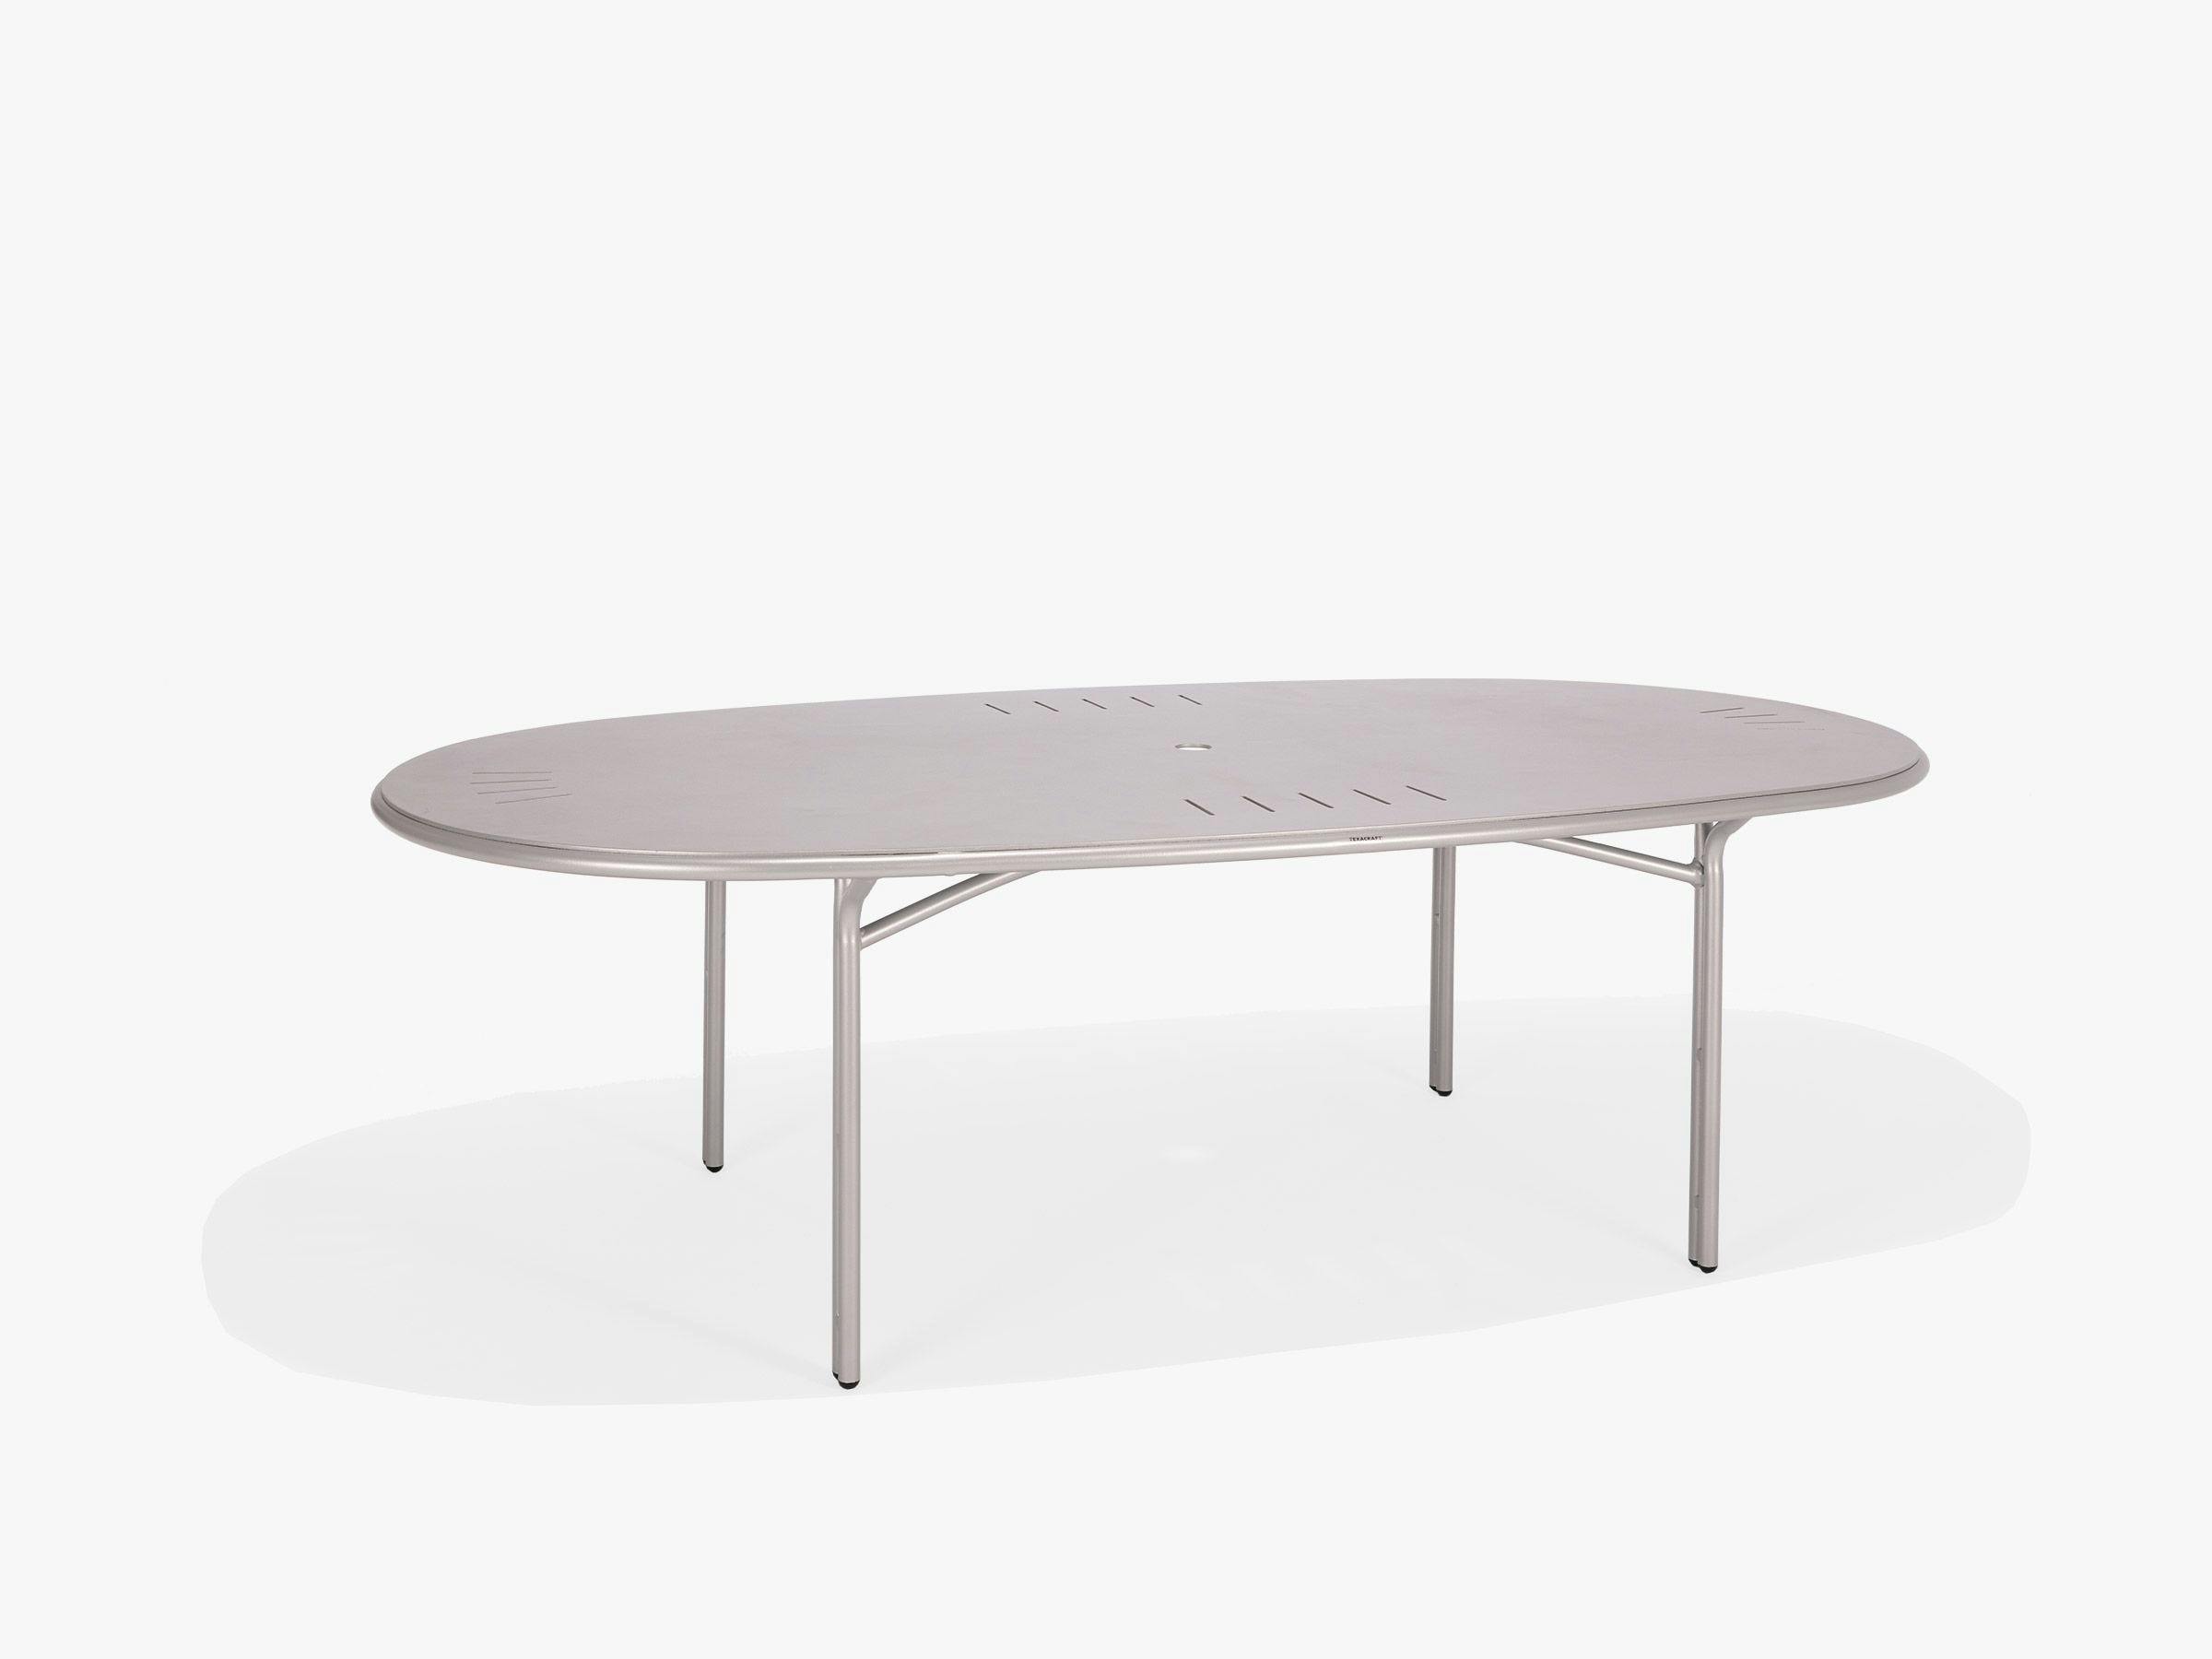 Surf Suncloth Weave 44 x 86 Oval Dining Table with stamped aluminum top